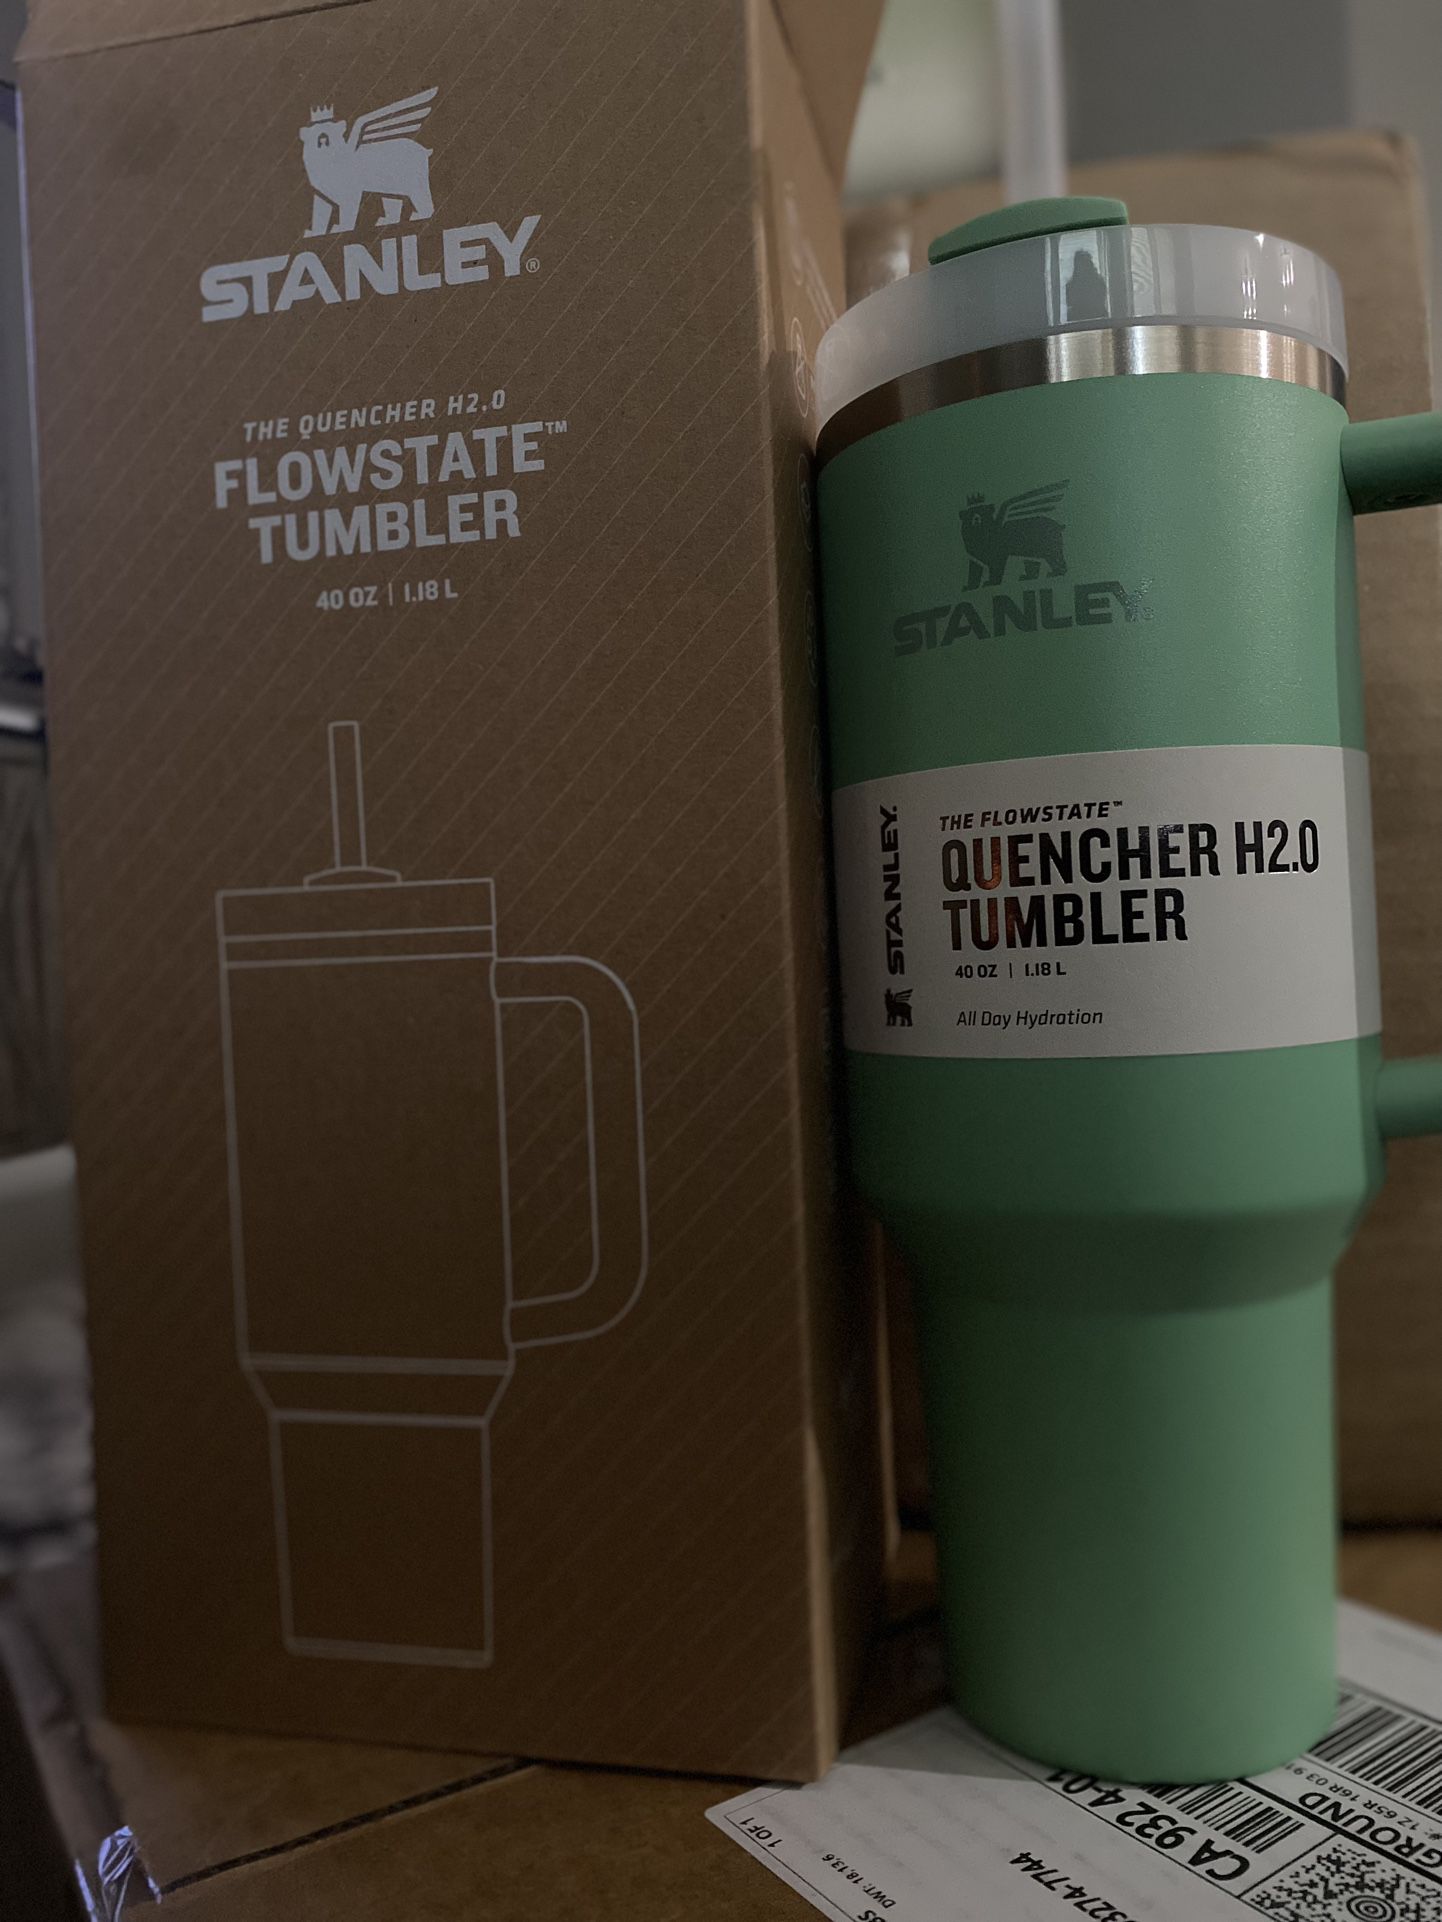 NEW STANLEY The Quencher H2.0 Flowstate Tumbler 40oz Mint Green W/box